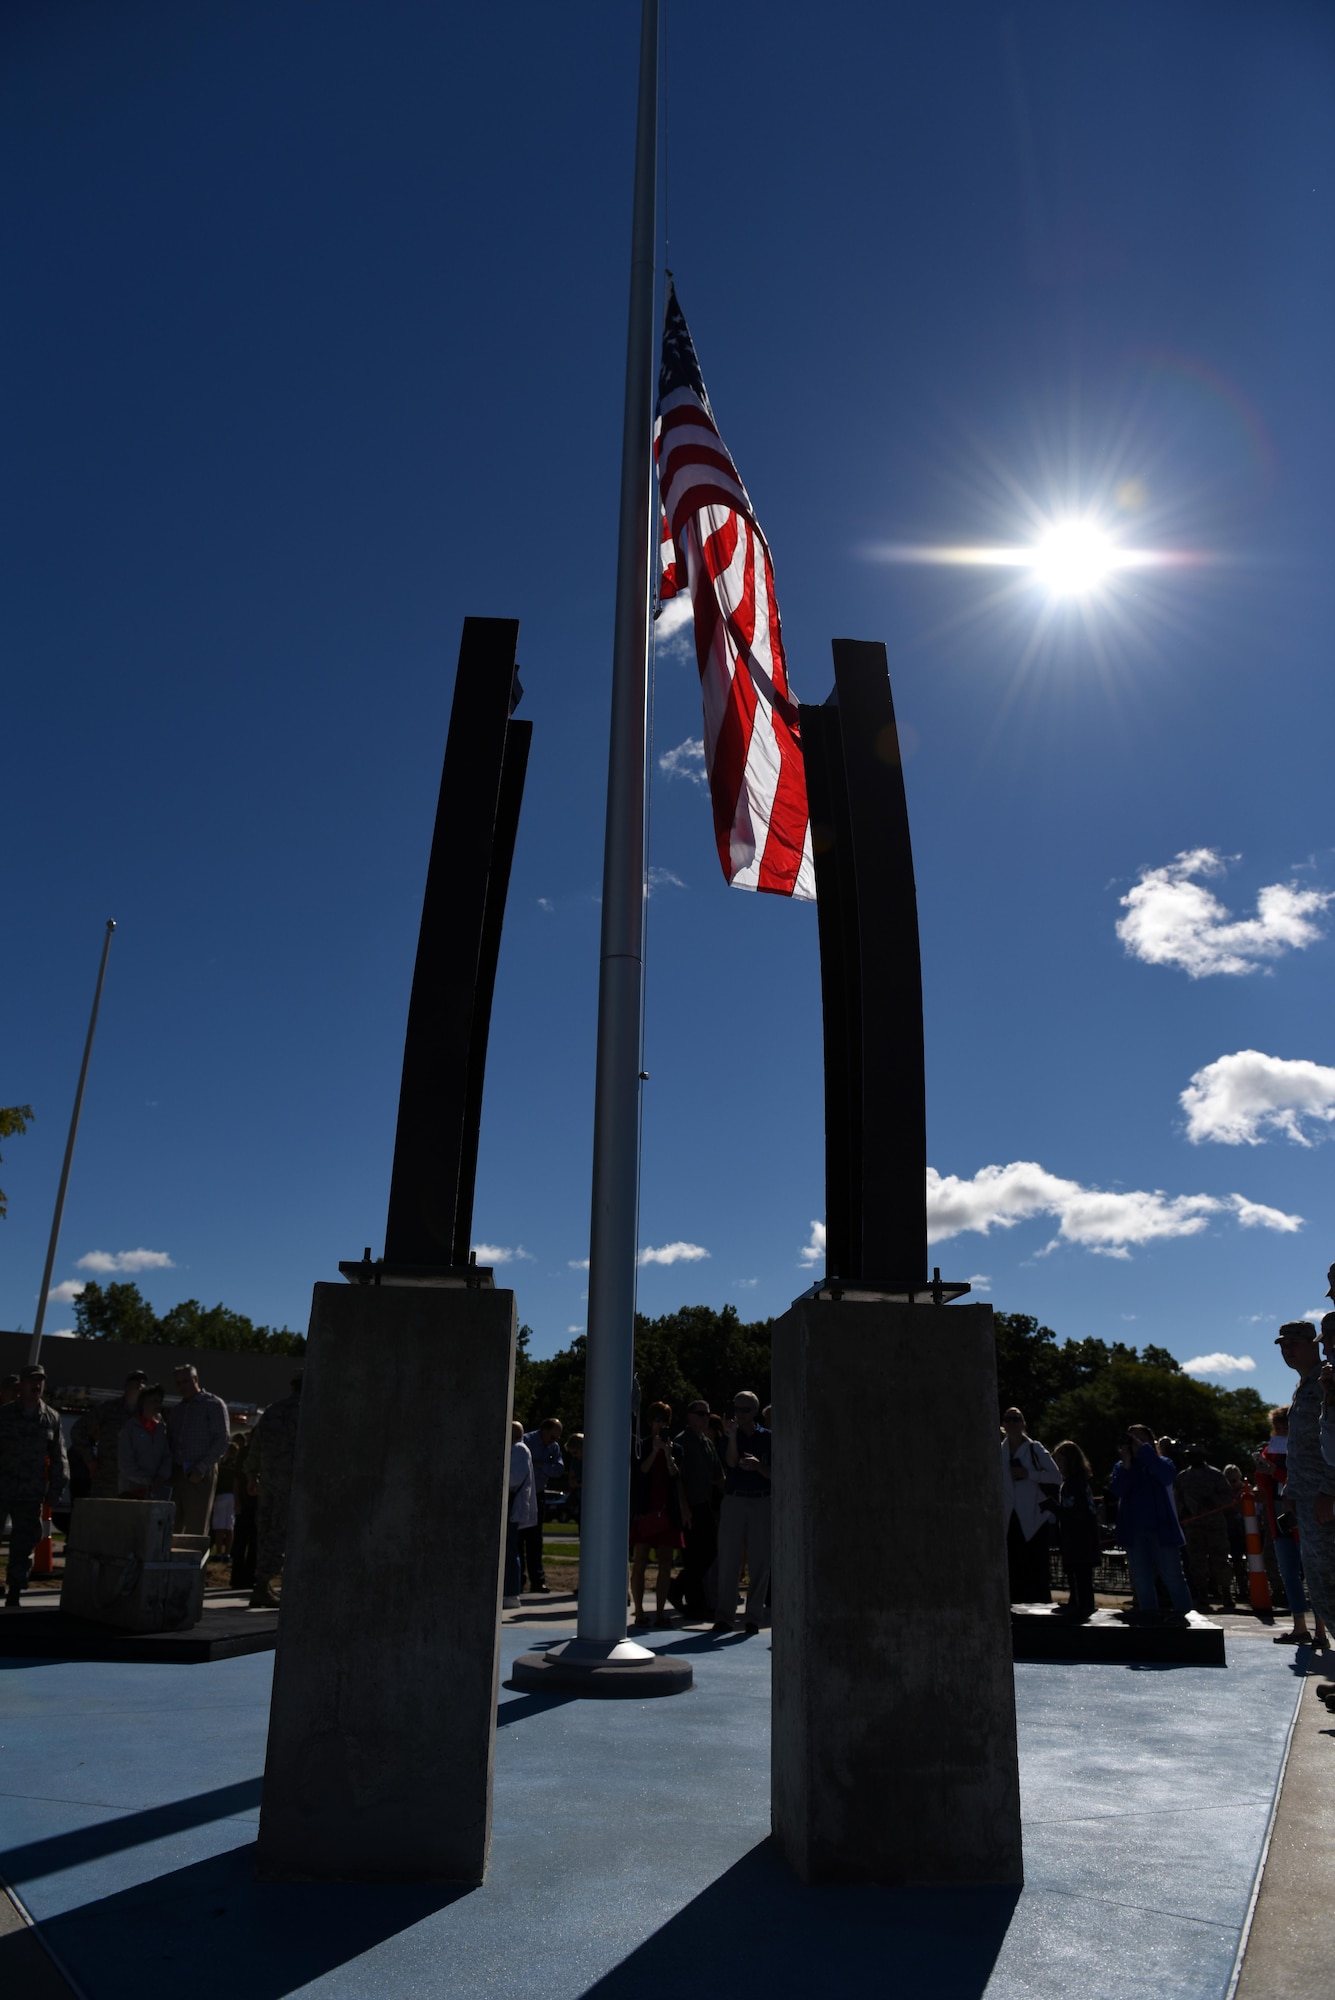 The Northwest Ohio 9/11 Memorial, located at the 180th Fighter Wing in Swanton, Ohio, was unveiled following the completion of phase 1 of construction on Sept. 11, 2016. Airmen with the 180FW and service members and civilians across the country marked the 15th anniversary of 9/11. Nearly 3,000 innocent lives were lost during the attacks.